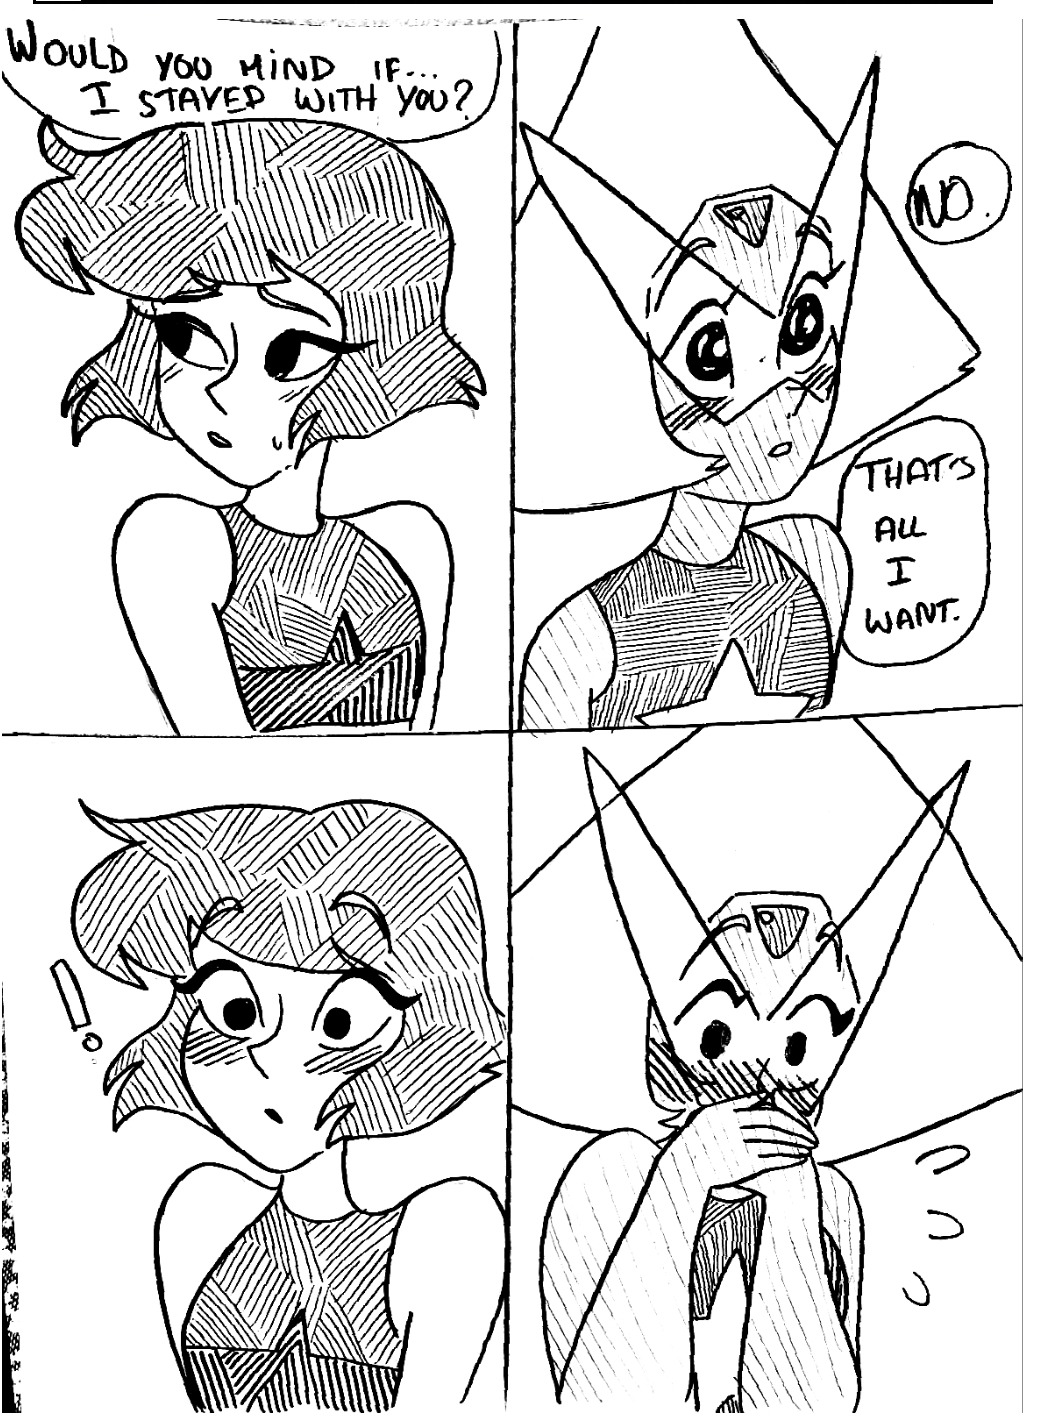 Y'all saying Peridot will not easily accept Lapis back but come on.